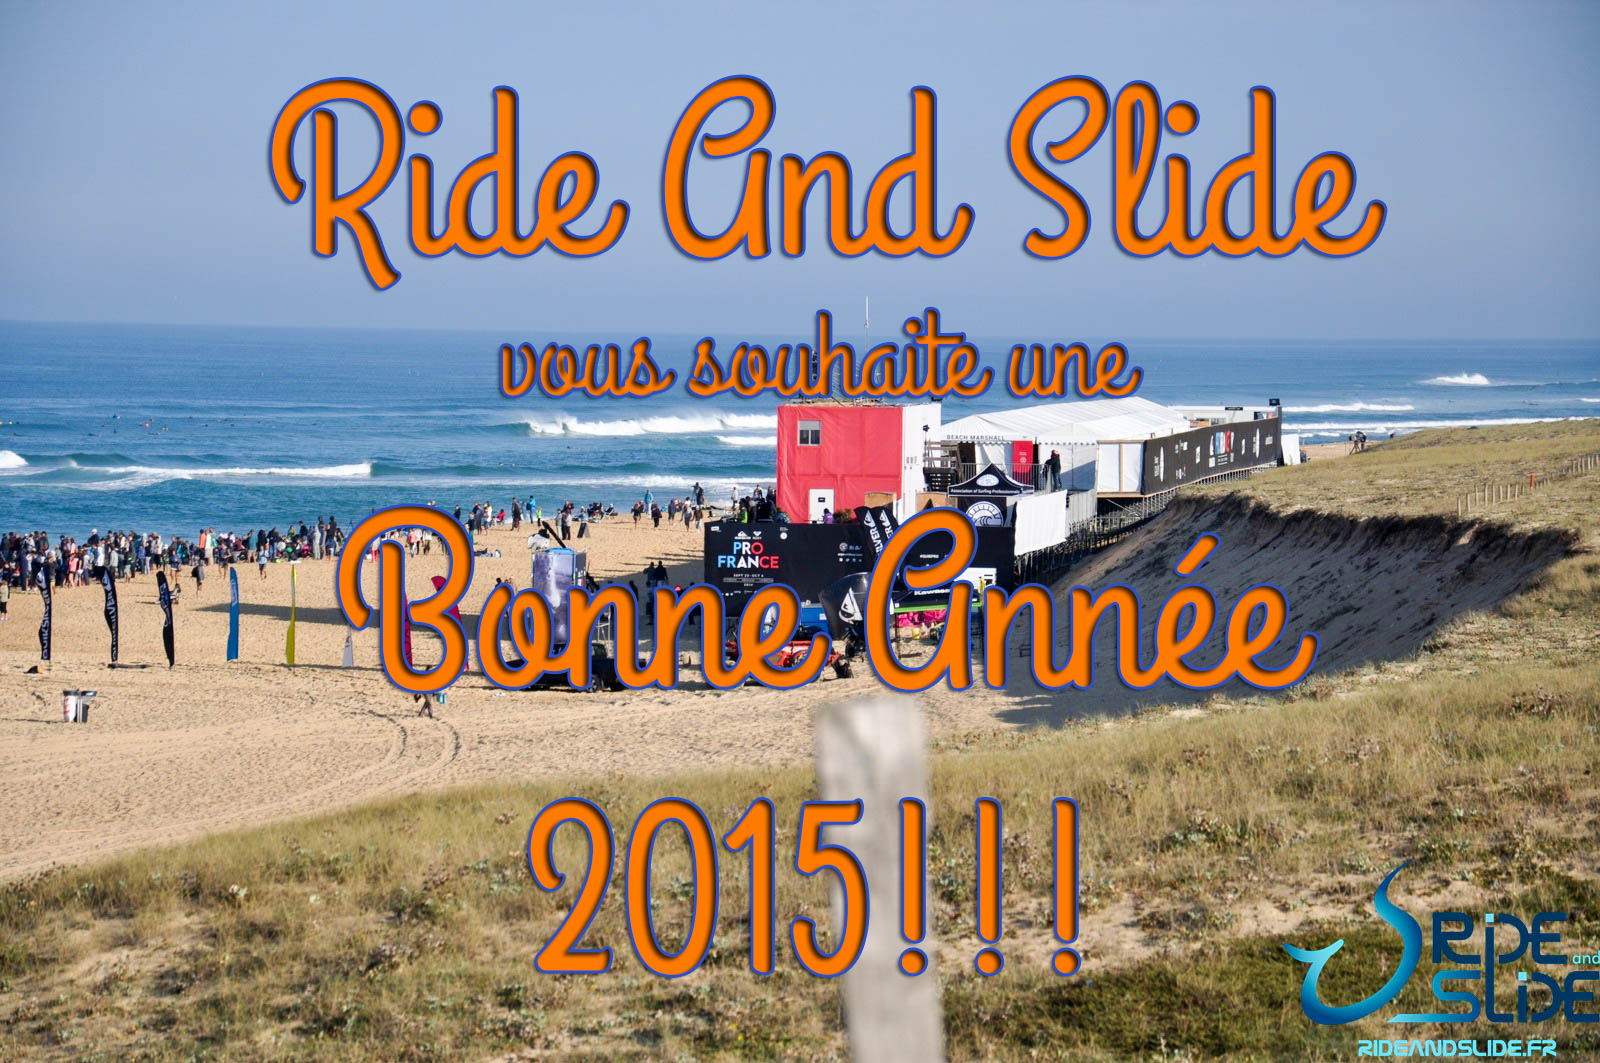 Best Of Ride And Slide 2014